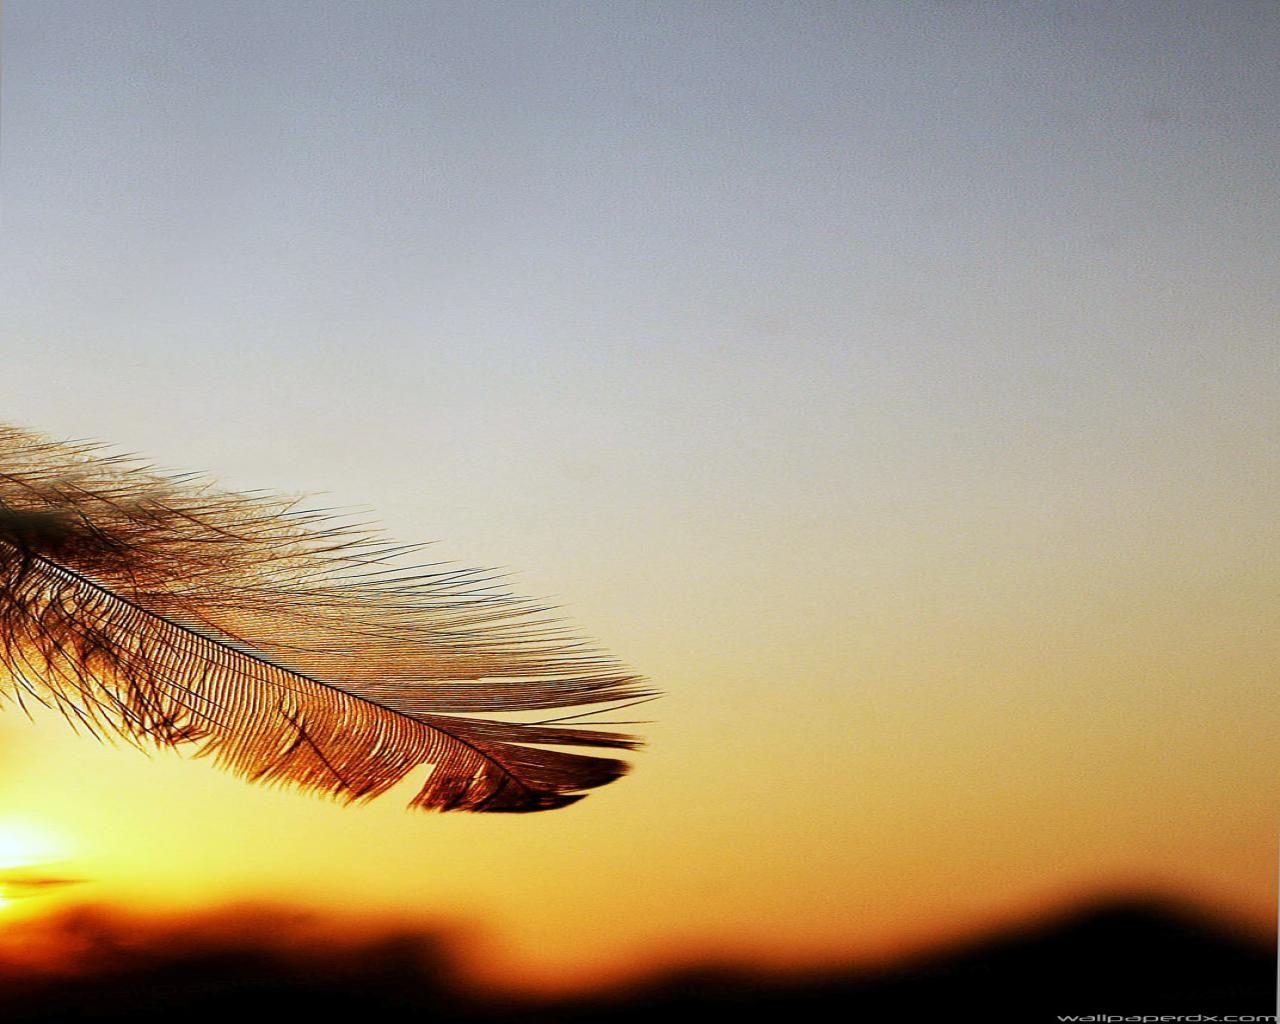 Samsung Galaxy Note 3 Stock Feather Sunset Full HD Android Wallpaper